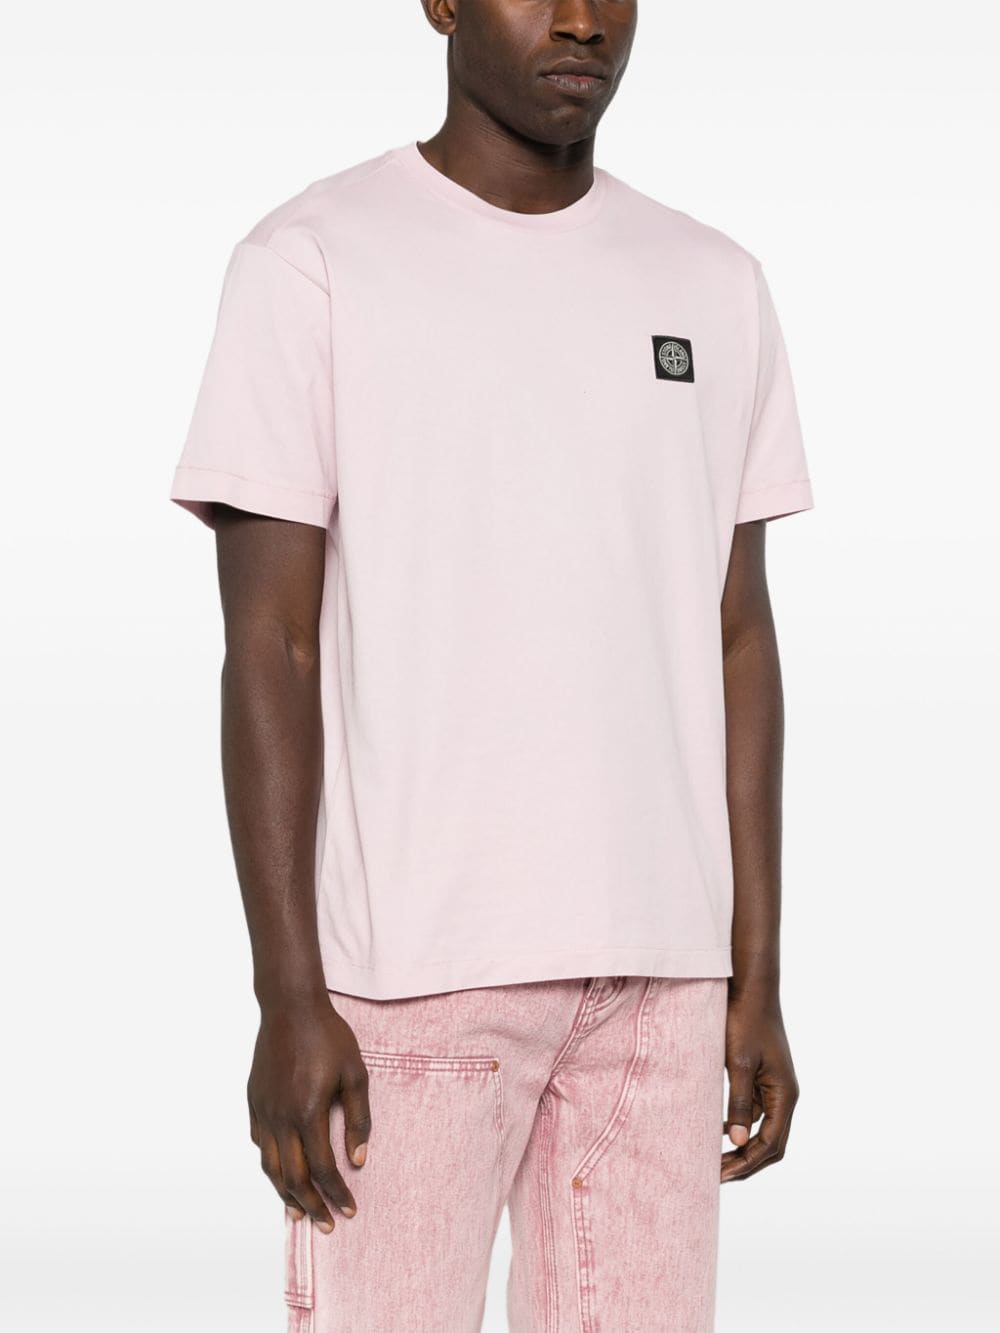 Stone Island - T Shirt rose 24113 - Lothaire